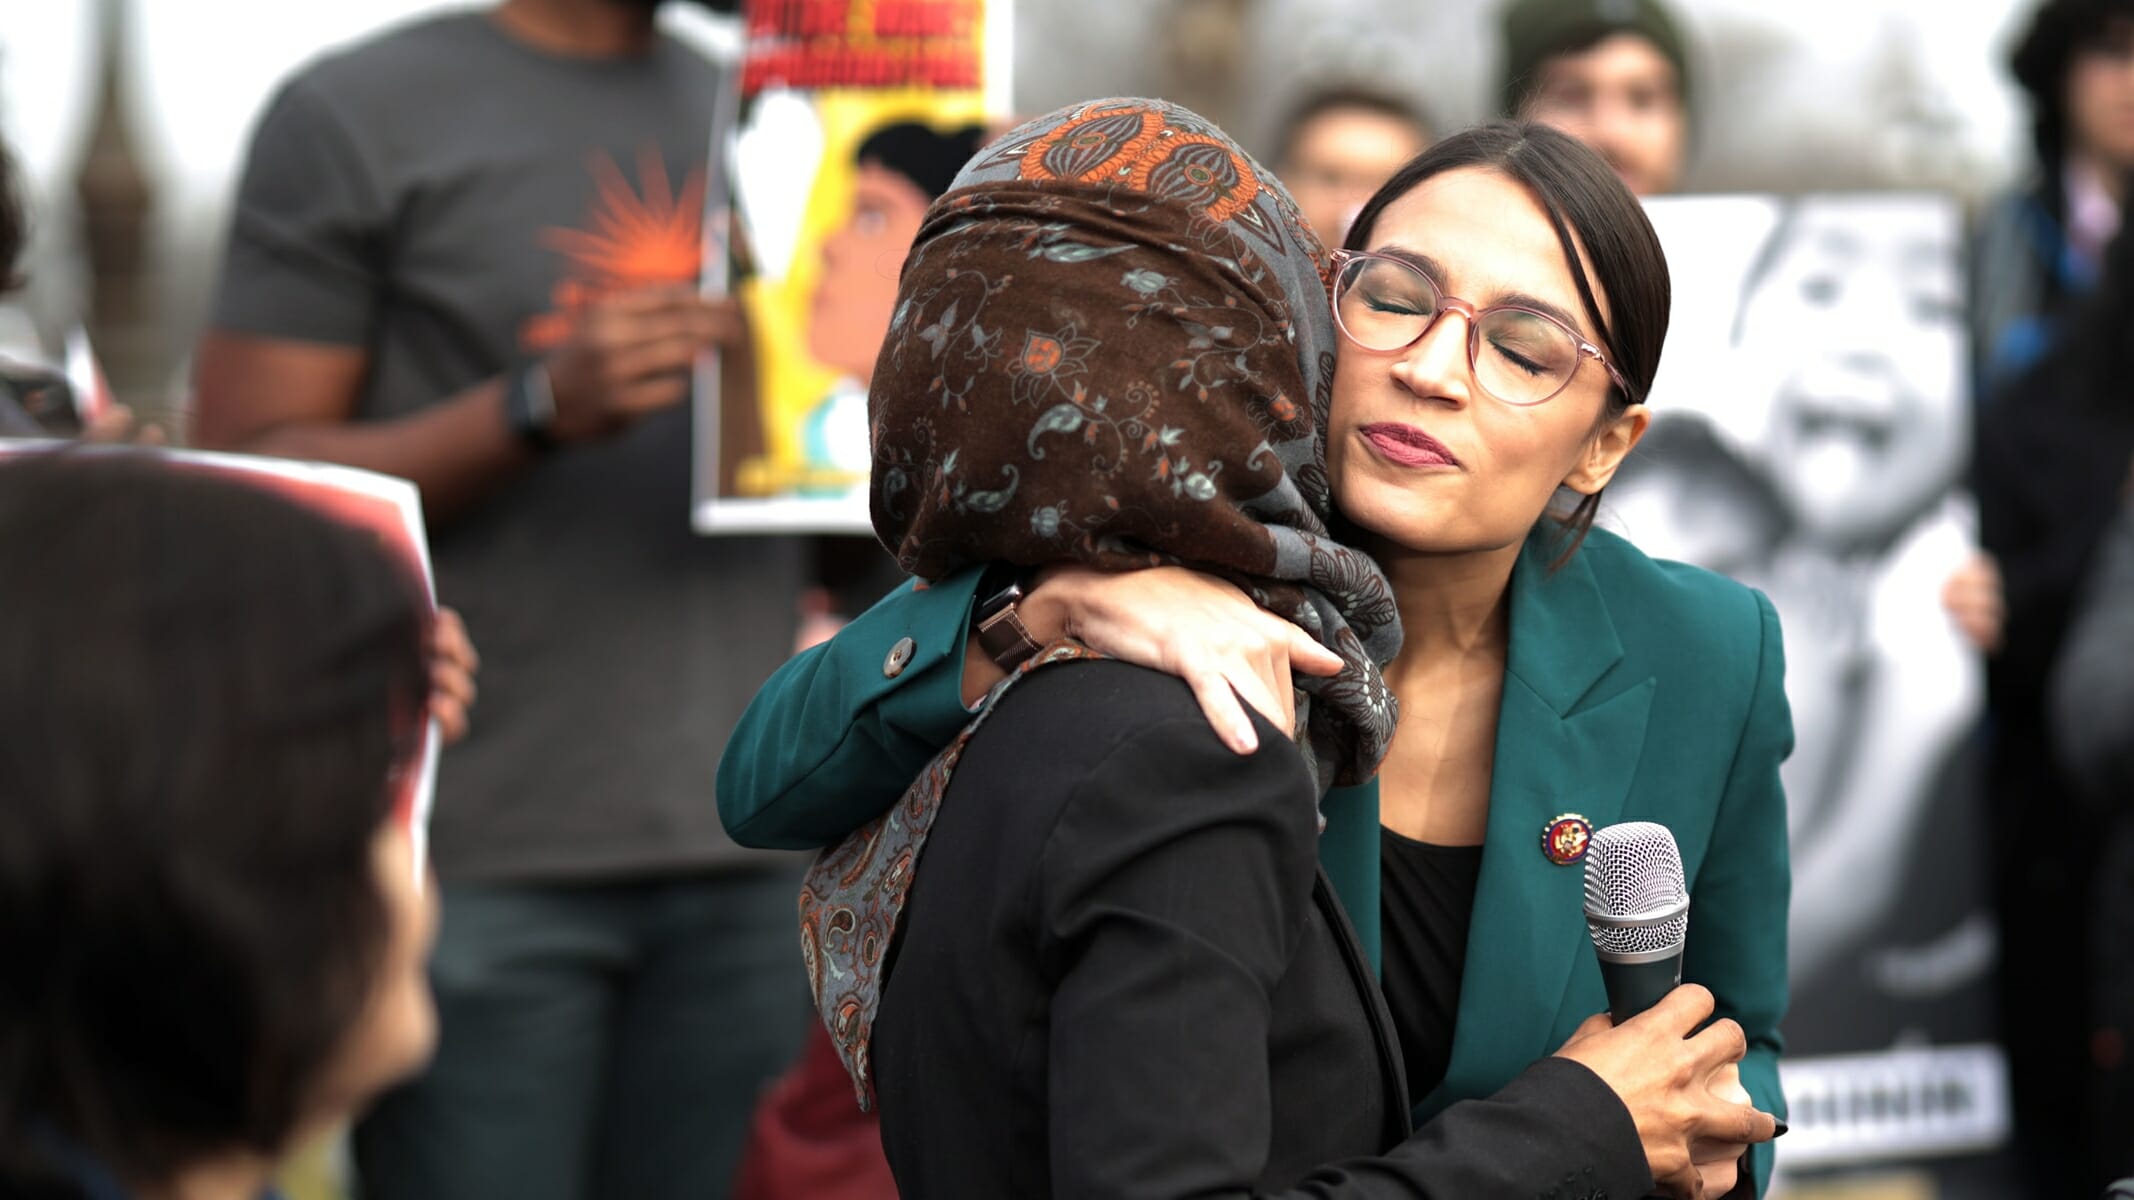 Conservative Media Are Putting Alexandria Ocasio-Cortez and Ilhan Omar’s Lives In Danger